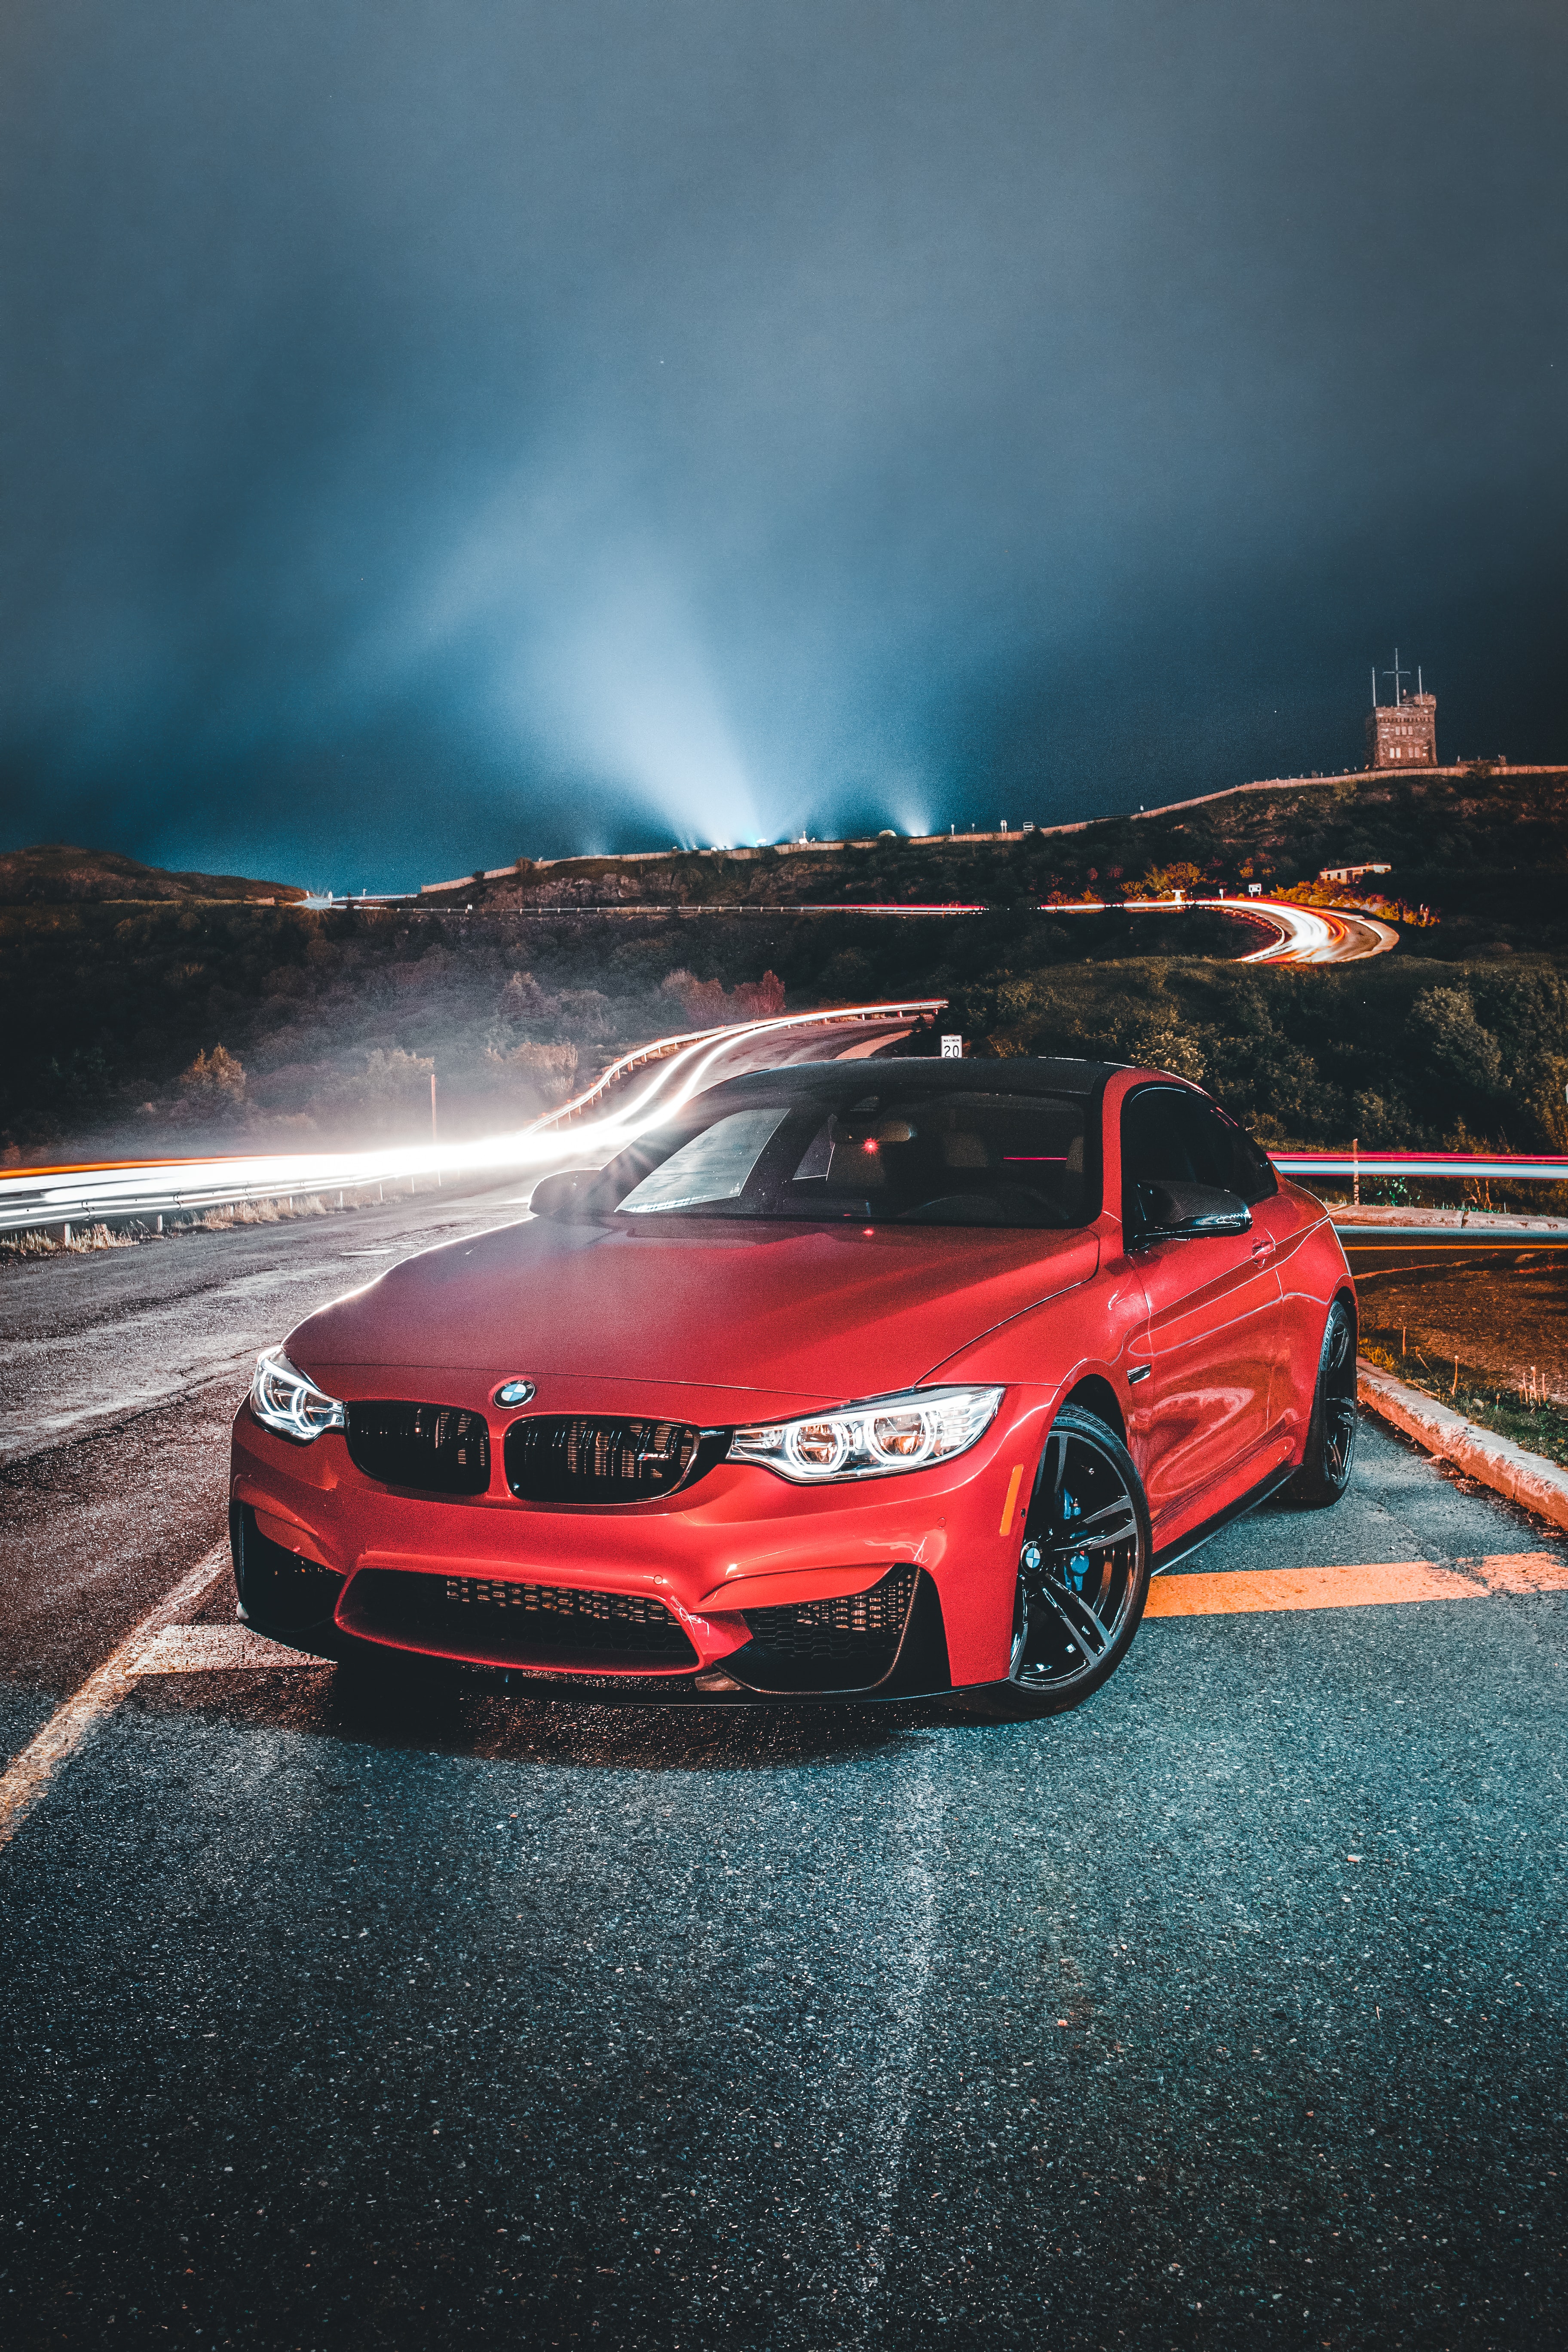 bmw, bmw 320i, cars, front view, machine, red, road, car cellphone